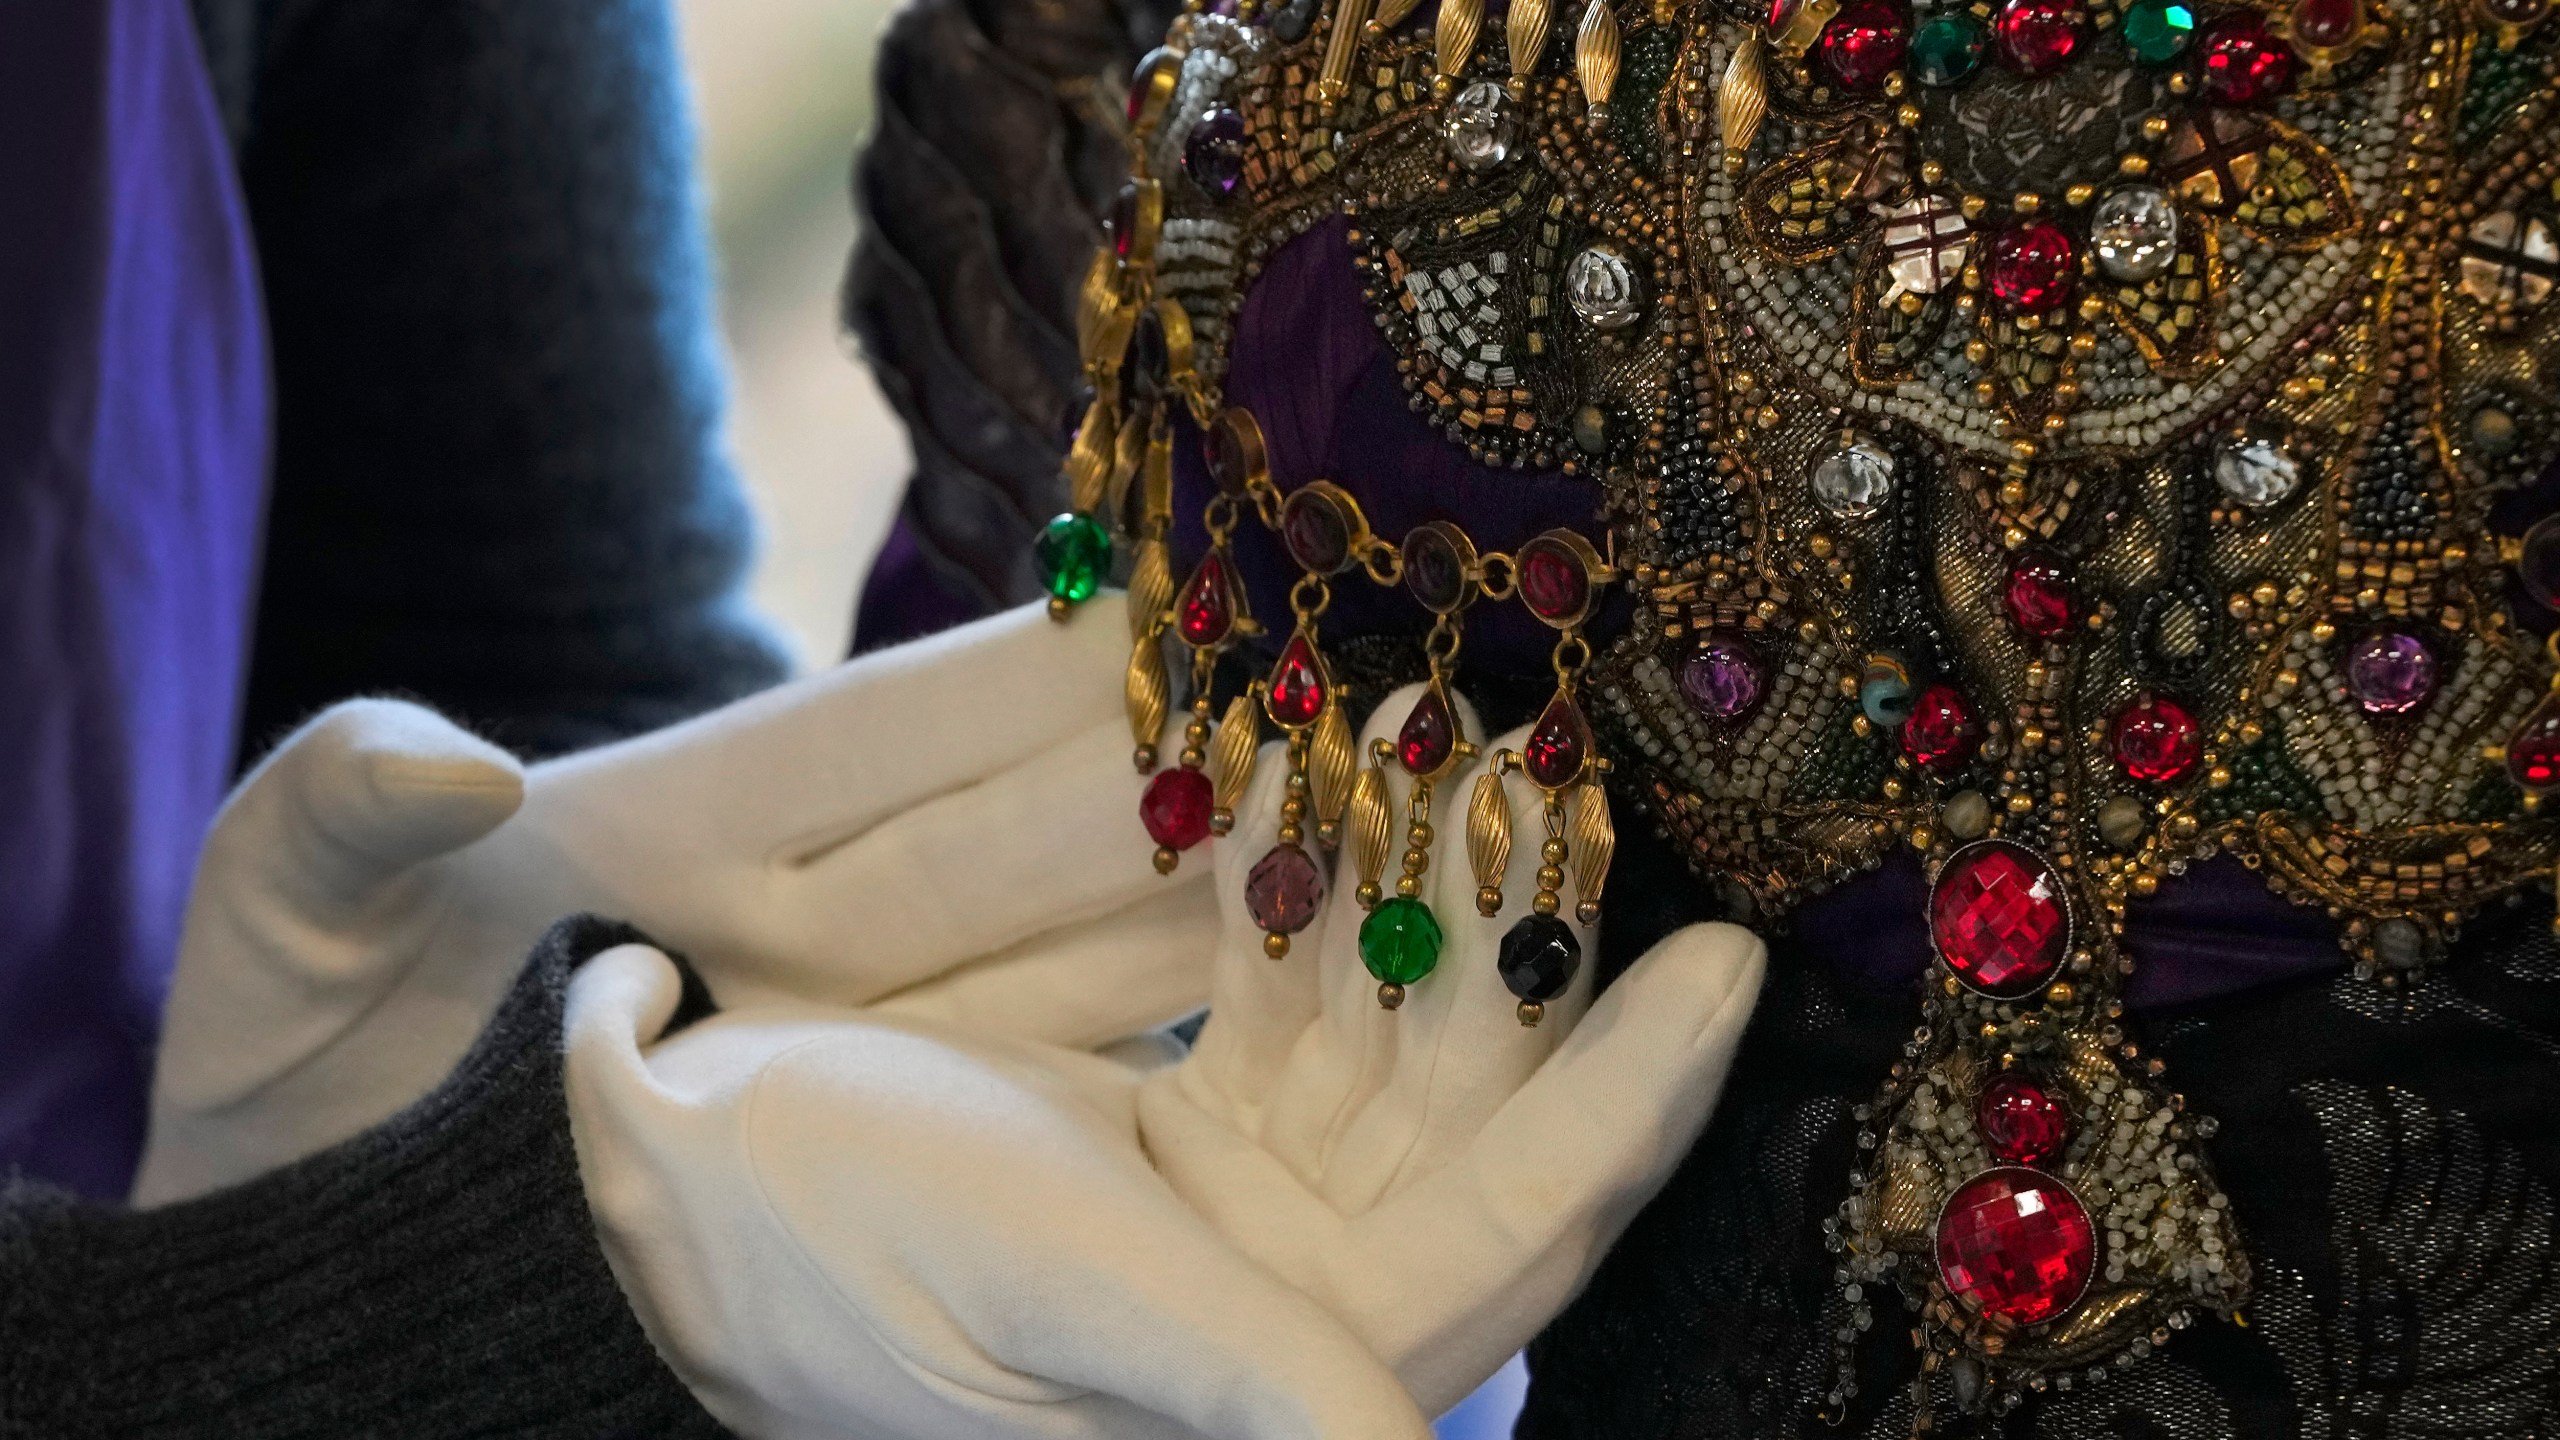 Detail on the bodice of Elizabeth Taylor's costume as Nadina Bullchoff in the film Young Toscanini, 1988 as it is displayed at Kerry Taylor Auctions in London, Tuesday, Feb. 27, 2024. The costume estimated at 3,000-5,000 UK Pounds (3,800-6,400 US Dollars) is one of 69 that will be for auction in the Lights Camera Auction event on March 5. The costumes have been donated by Cosprop in support of The Bright Foundation, an arts education charity, established and funded by John Bright, to provide life-enhancing, creative experiences for children and young people facing disadvantage. (AP Photo/Kirsty Wigglesworth)